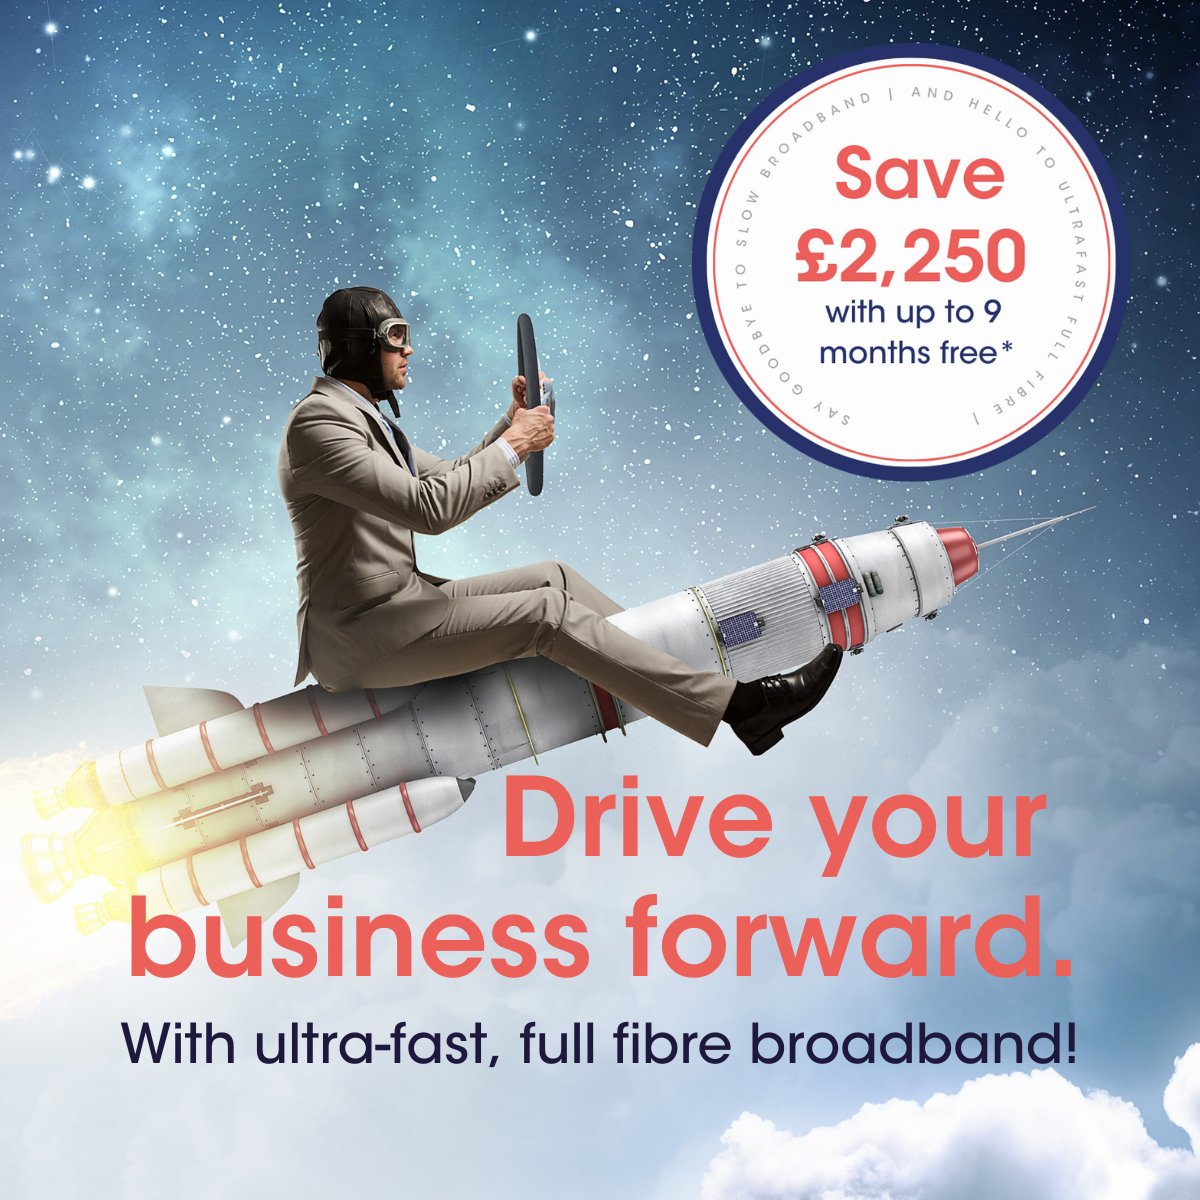 At dbfb, we’ll bring you speeds up to 100x faster than the average UK business broadband. You can also save up to £2,250 and get up to 9 months free. Get in touch and learn more about what is in store for your business eu1.hubs.ly/H03j6BT0 discover@dbfb.co.uk | 01604673320